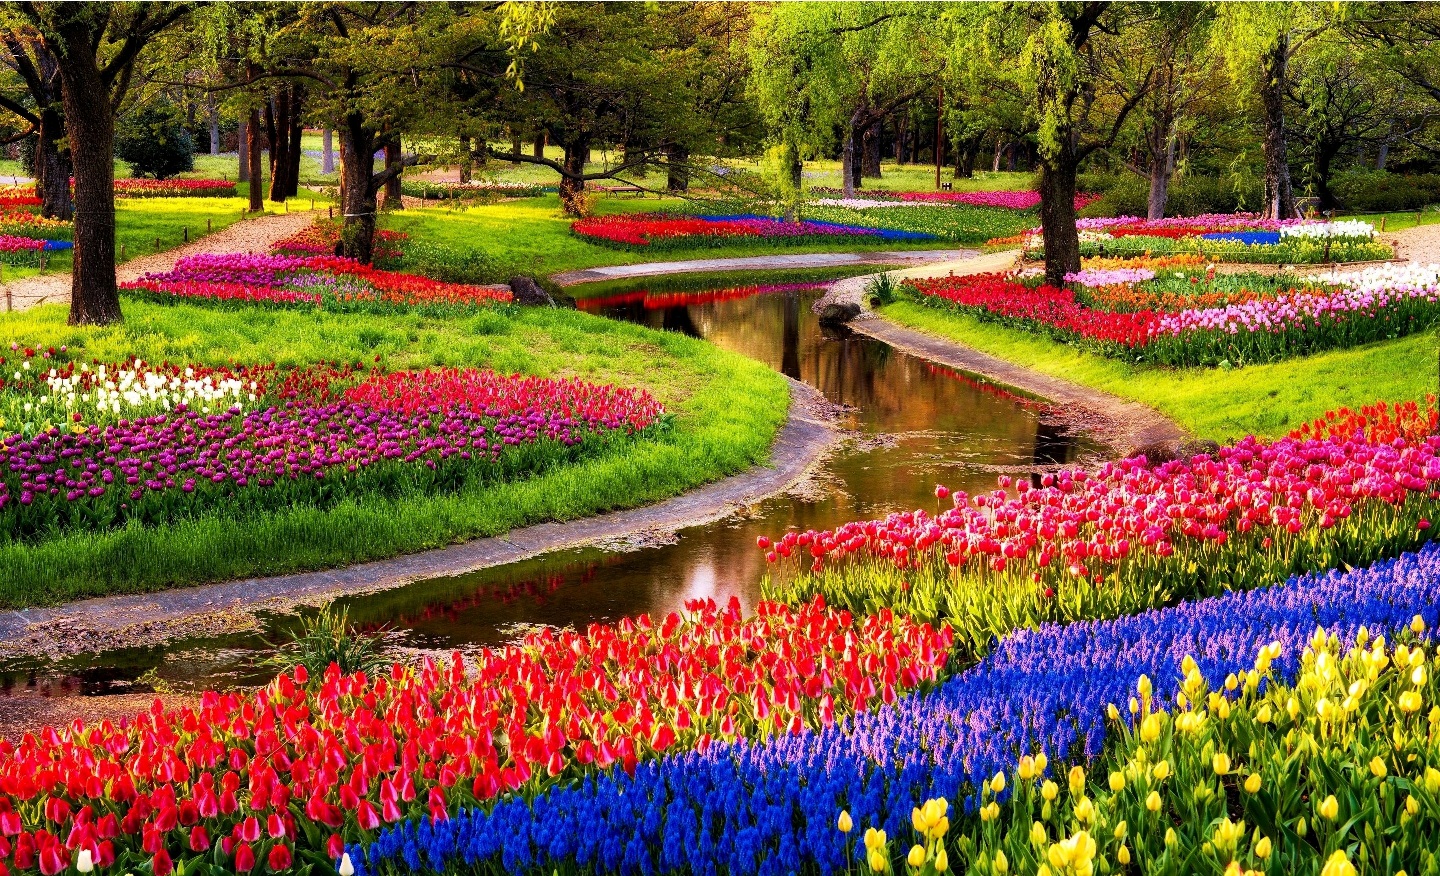 Keukenhof A Haven Of Tulips In Amsterdam The Netherlands